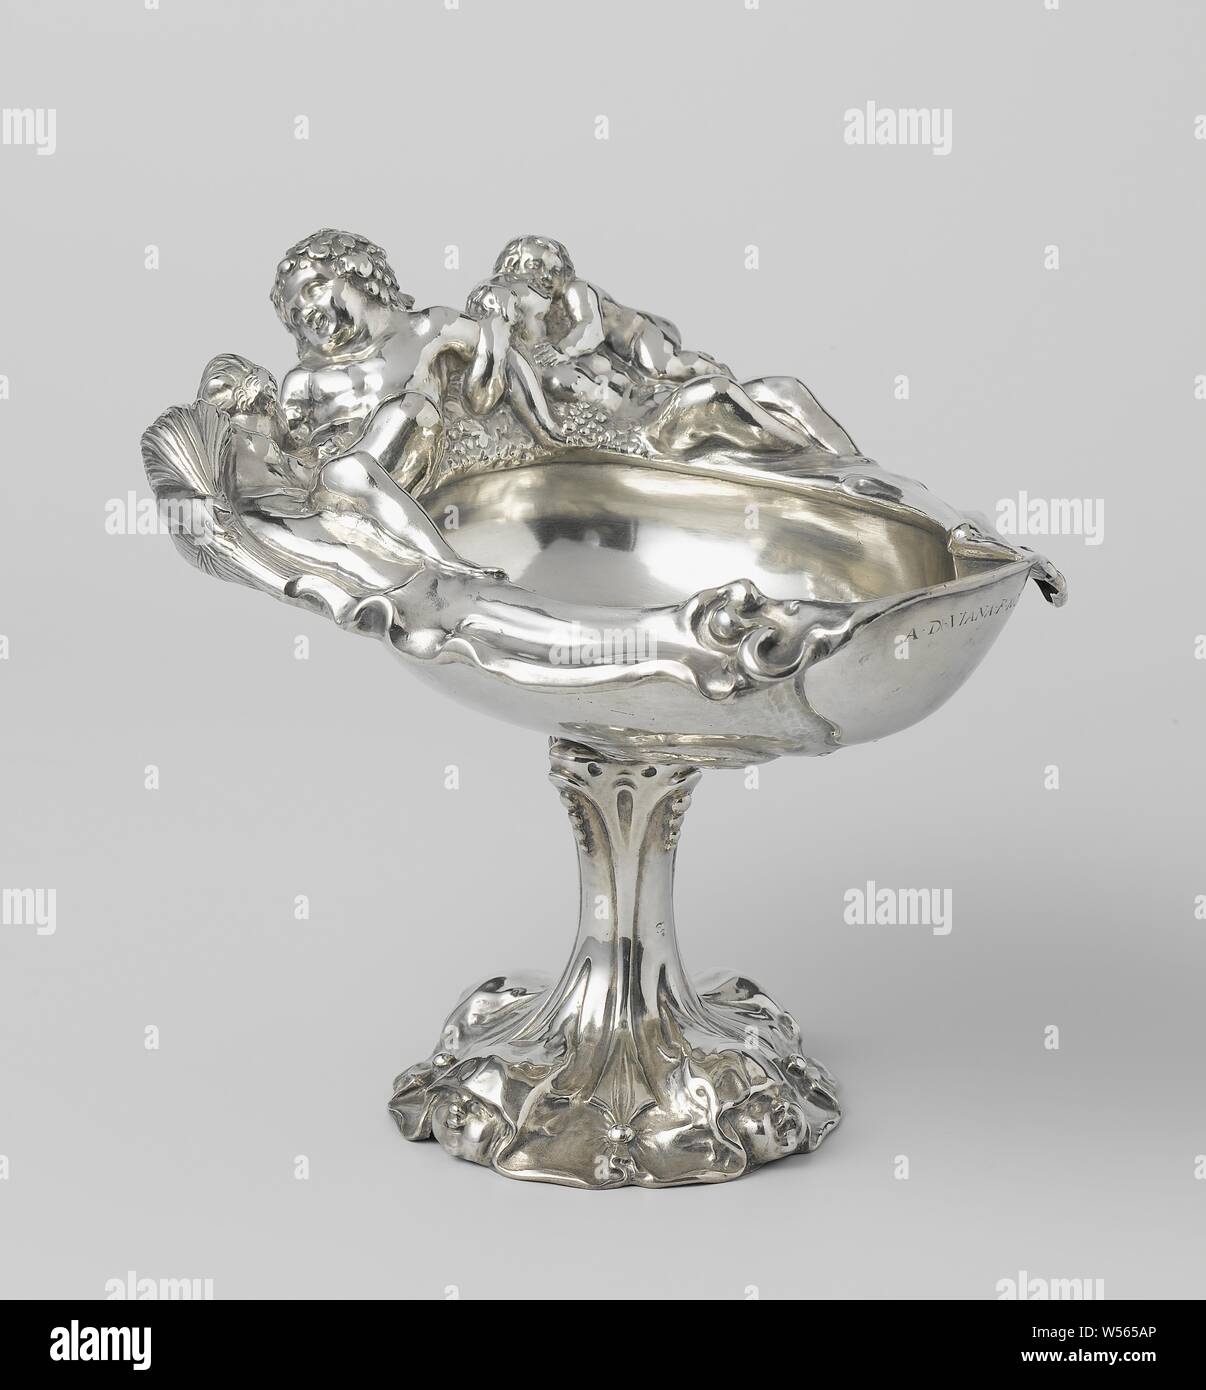 Tazza (footed drinking cup), Driven silver coupe, Driven silver coupe. The asymmetrical cuppa is decorated with lobster ornament. On the edge the figures of Bacchus, Ceres and Venus with Amor, auricular ornament, lobe style, ornament, (story of) Bacchus (Dionysus), Liber, (story of) Ceres (Demeter), (story of) Venus (Aphrodite), (story of) Cupid, Amor (Eros), Adam van Vianen (I), Utrecht, 1621, silver (metal), h 15.6 cm × l 17.8 cm × w 13.9 cm Stock Photo